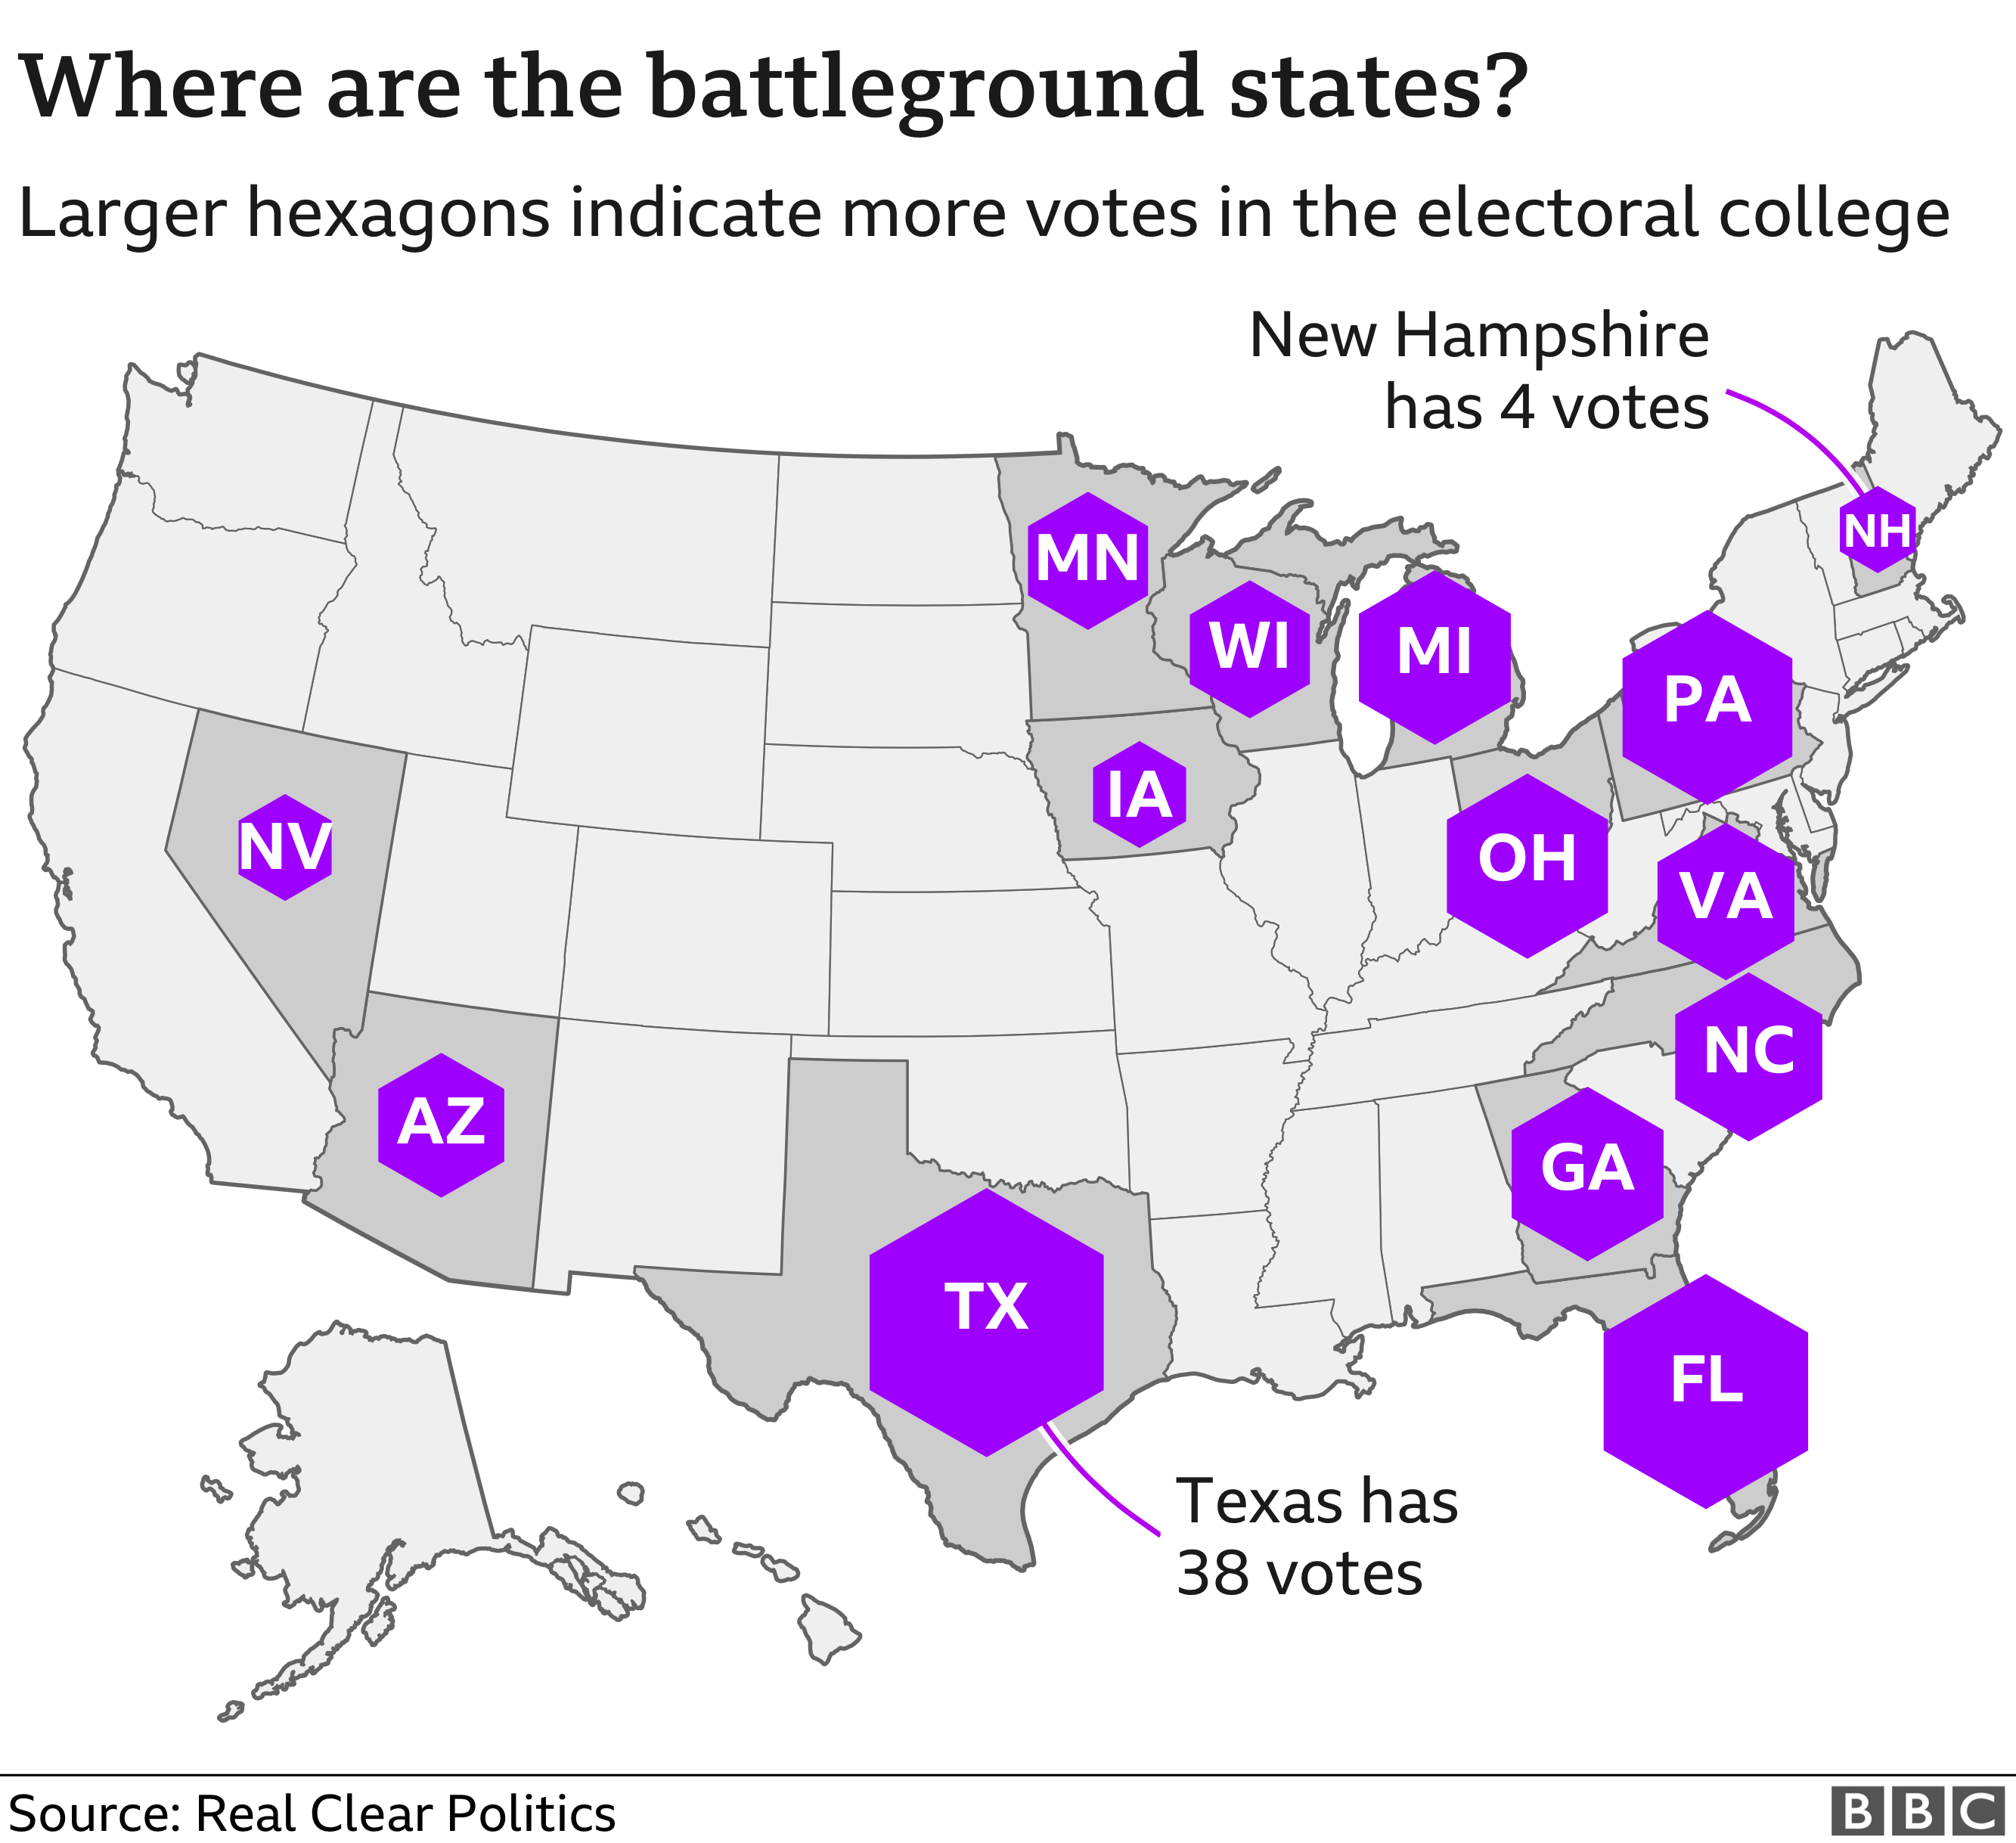 Map showing where the battleground states are in the 2020 election. Texas has the largest number of electoral college votes (38) while New Hampshire has the fewest (4)